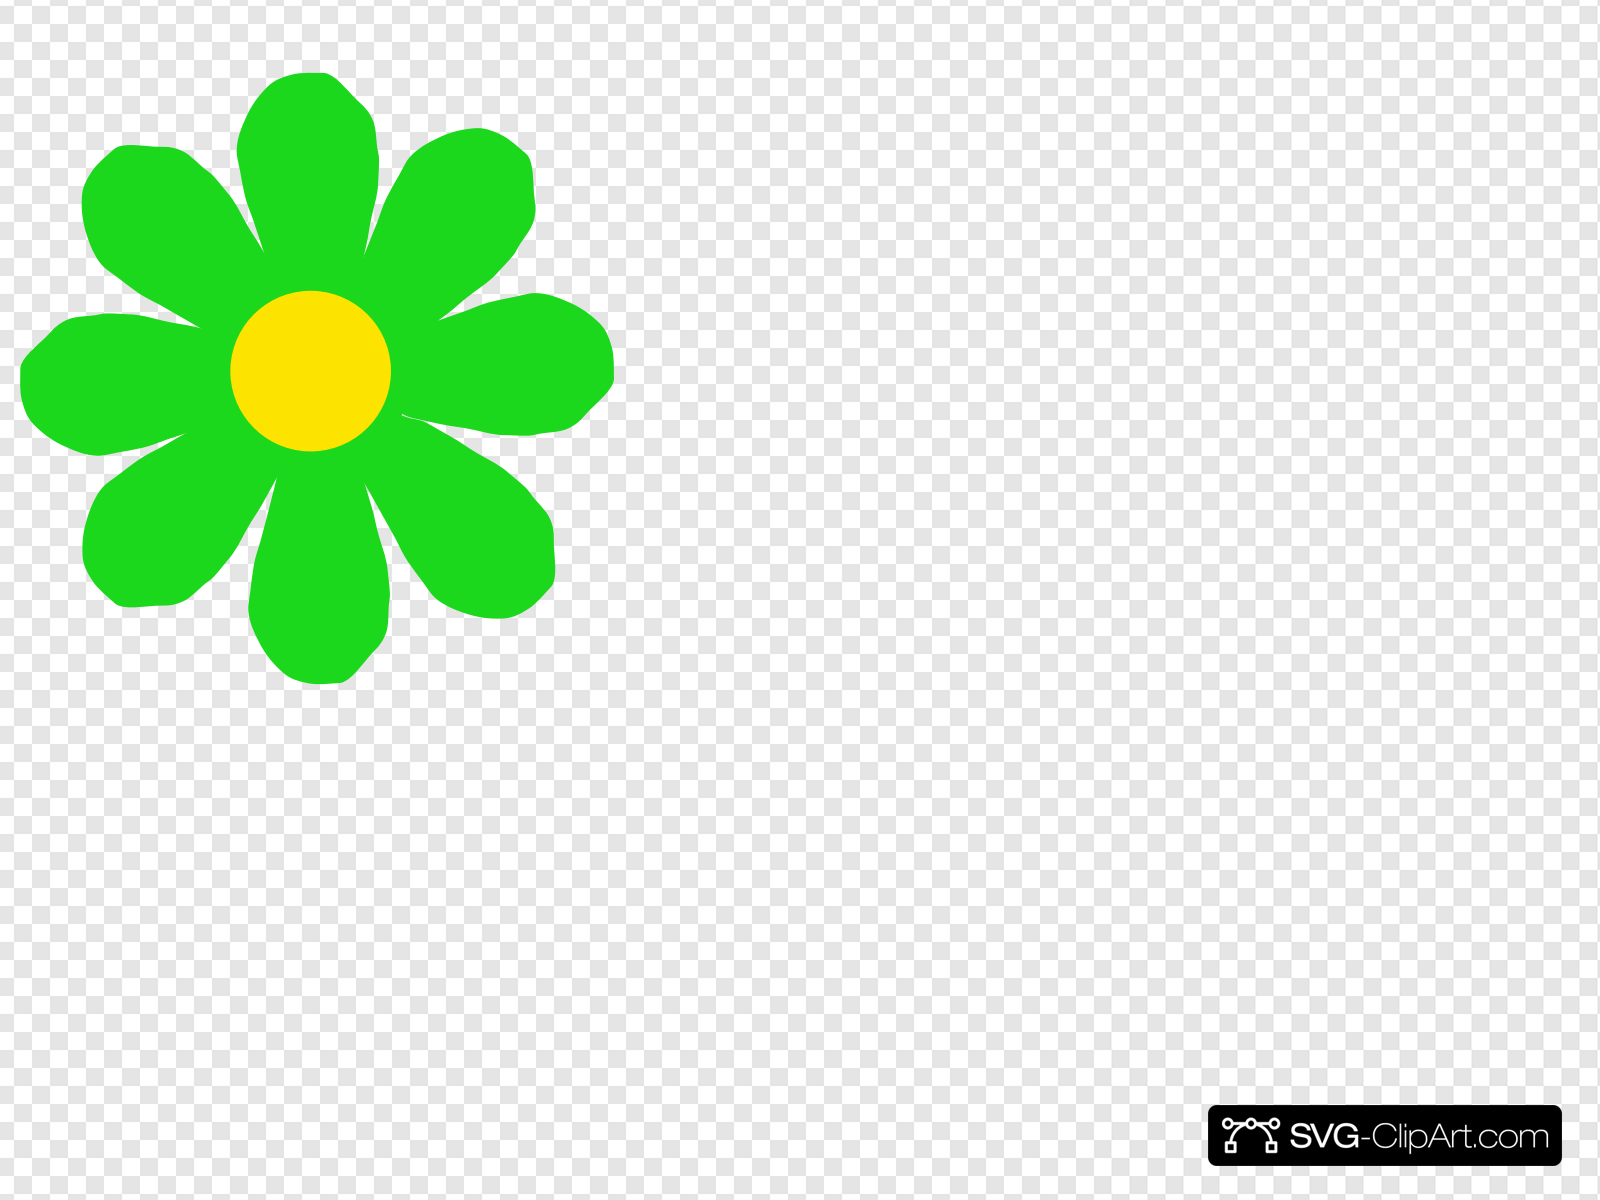 Bright Green Flower Clip art, Icon and SVG.